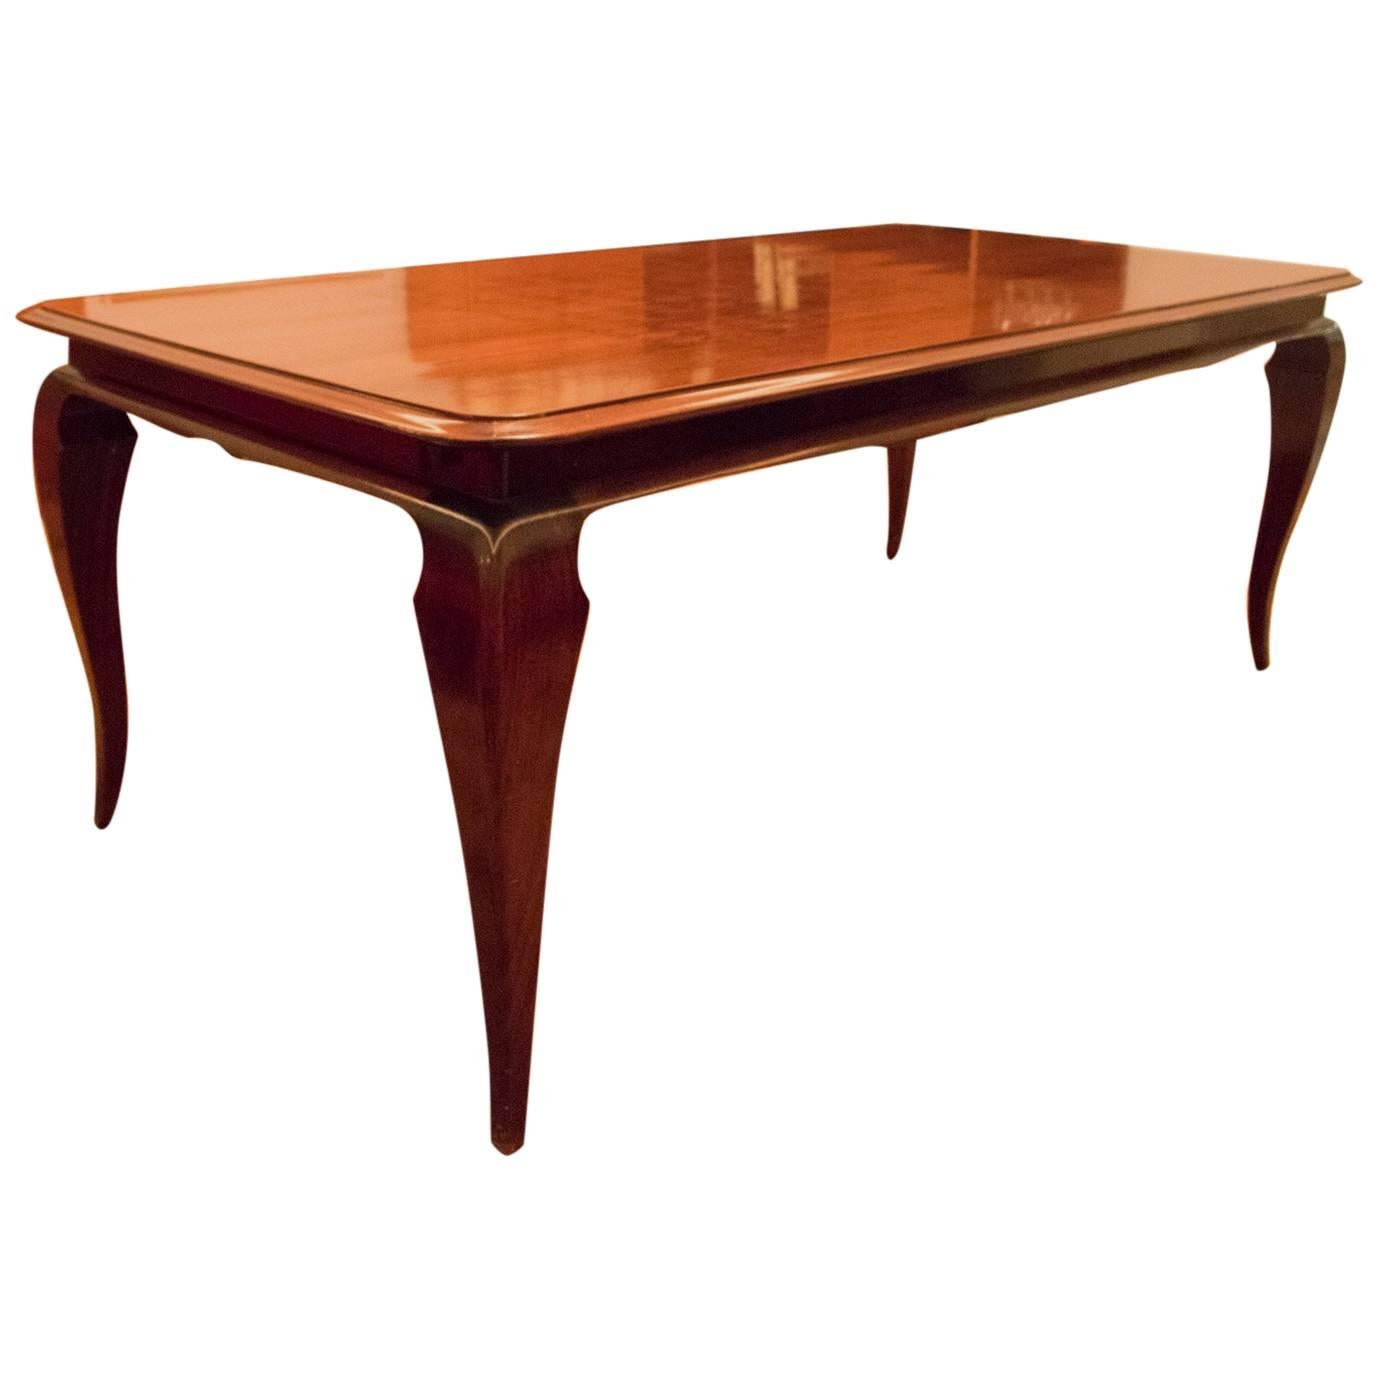 Jean Pascaud Style Art Deco Rosewood Dining Table Flared Legs Extension Seats 12 For Sale